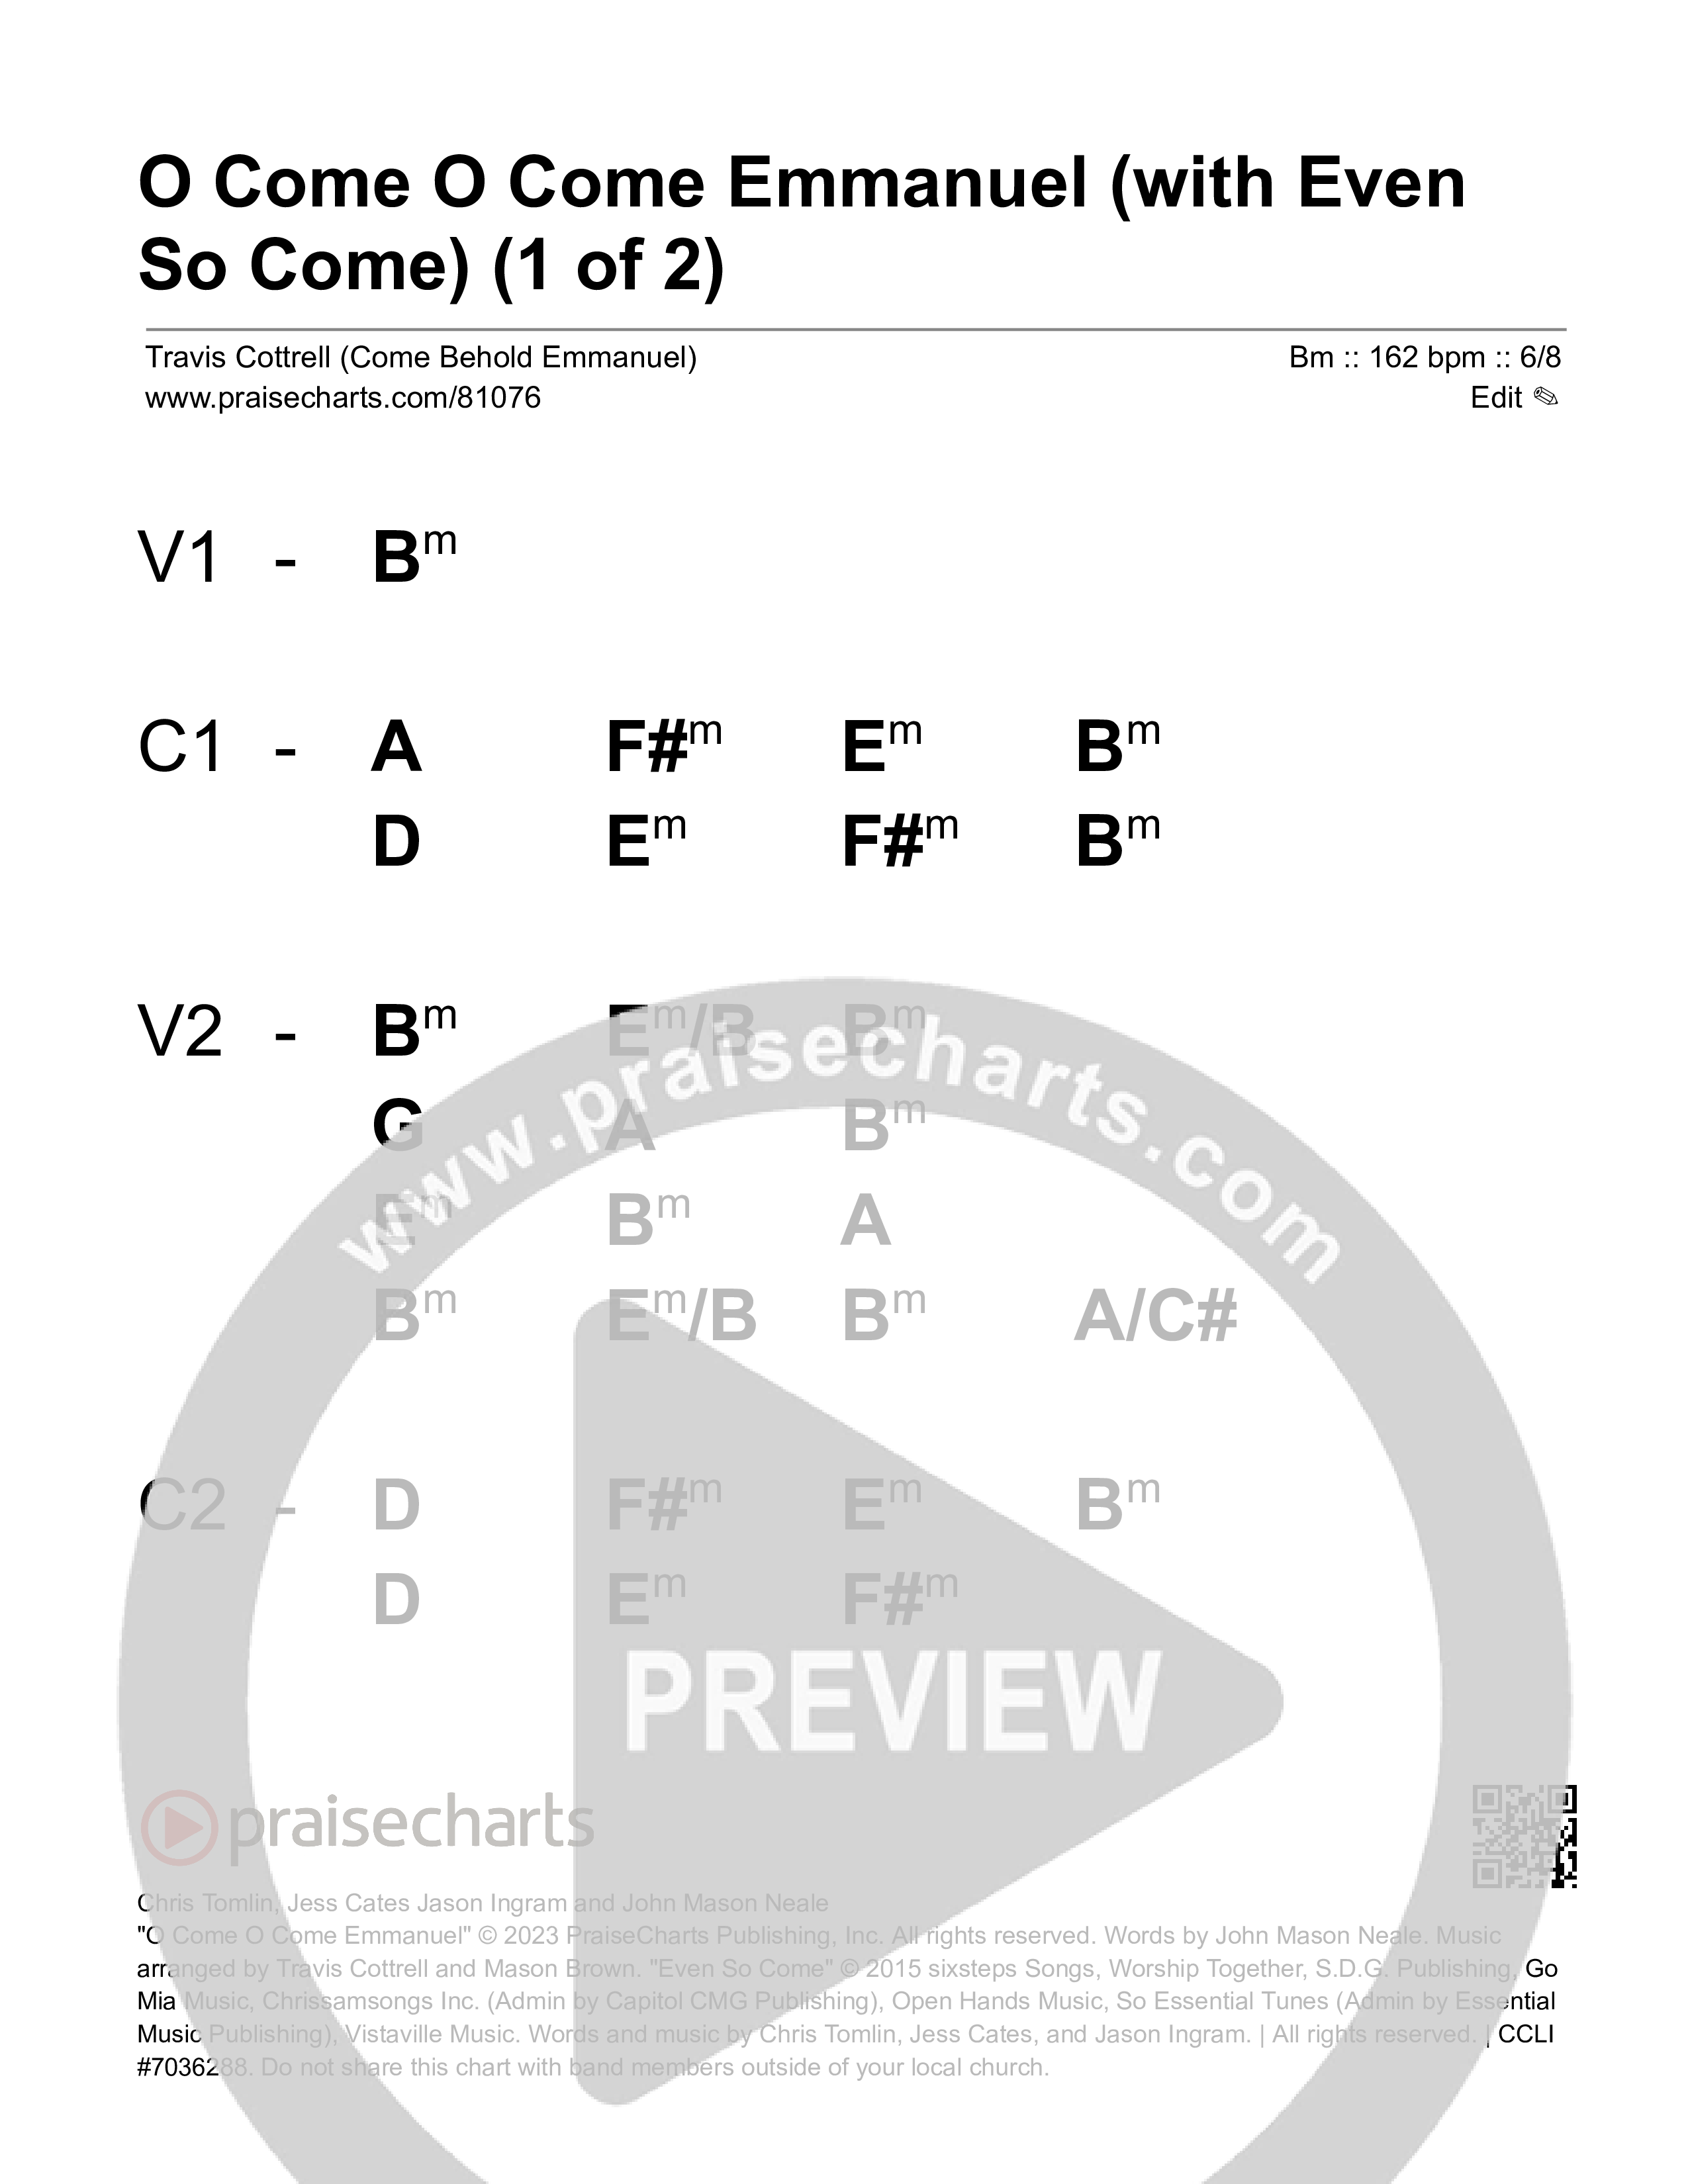 O Come O Come Emmanuel (with Even So Come) Stage Chart (Cheryl Stark / Arr. Travis Cottrell / Orch. Mason Brown)